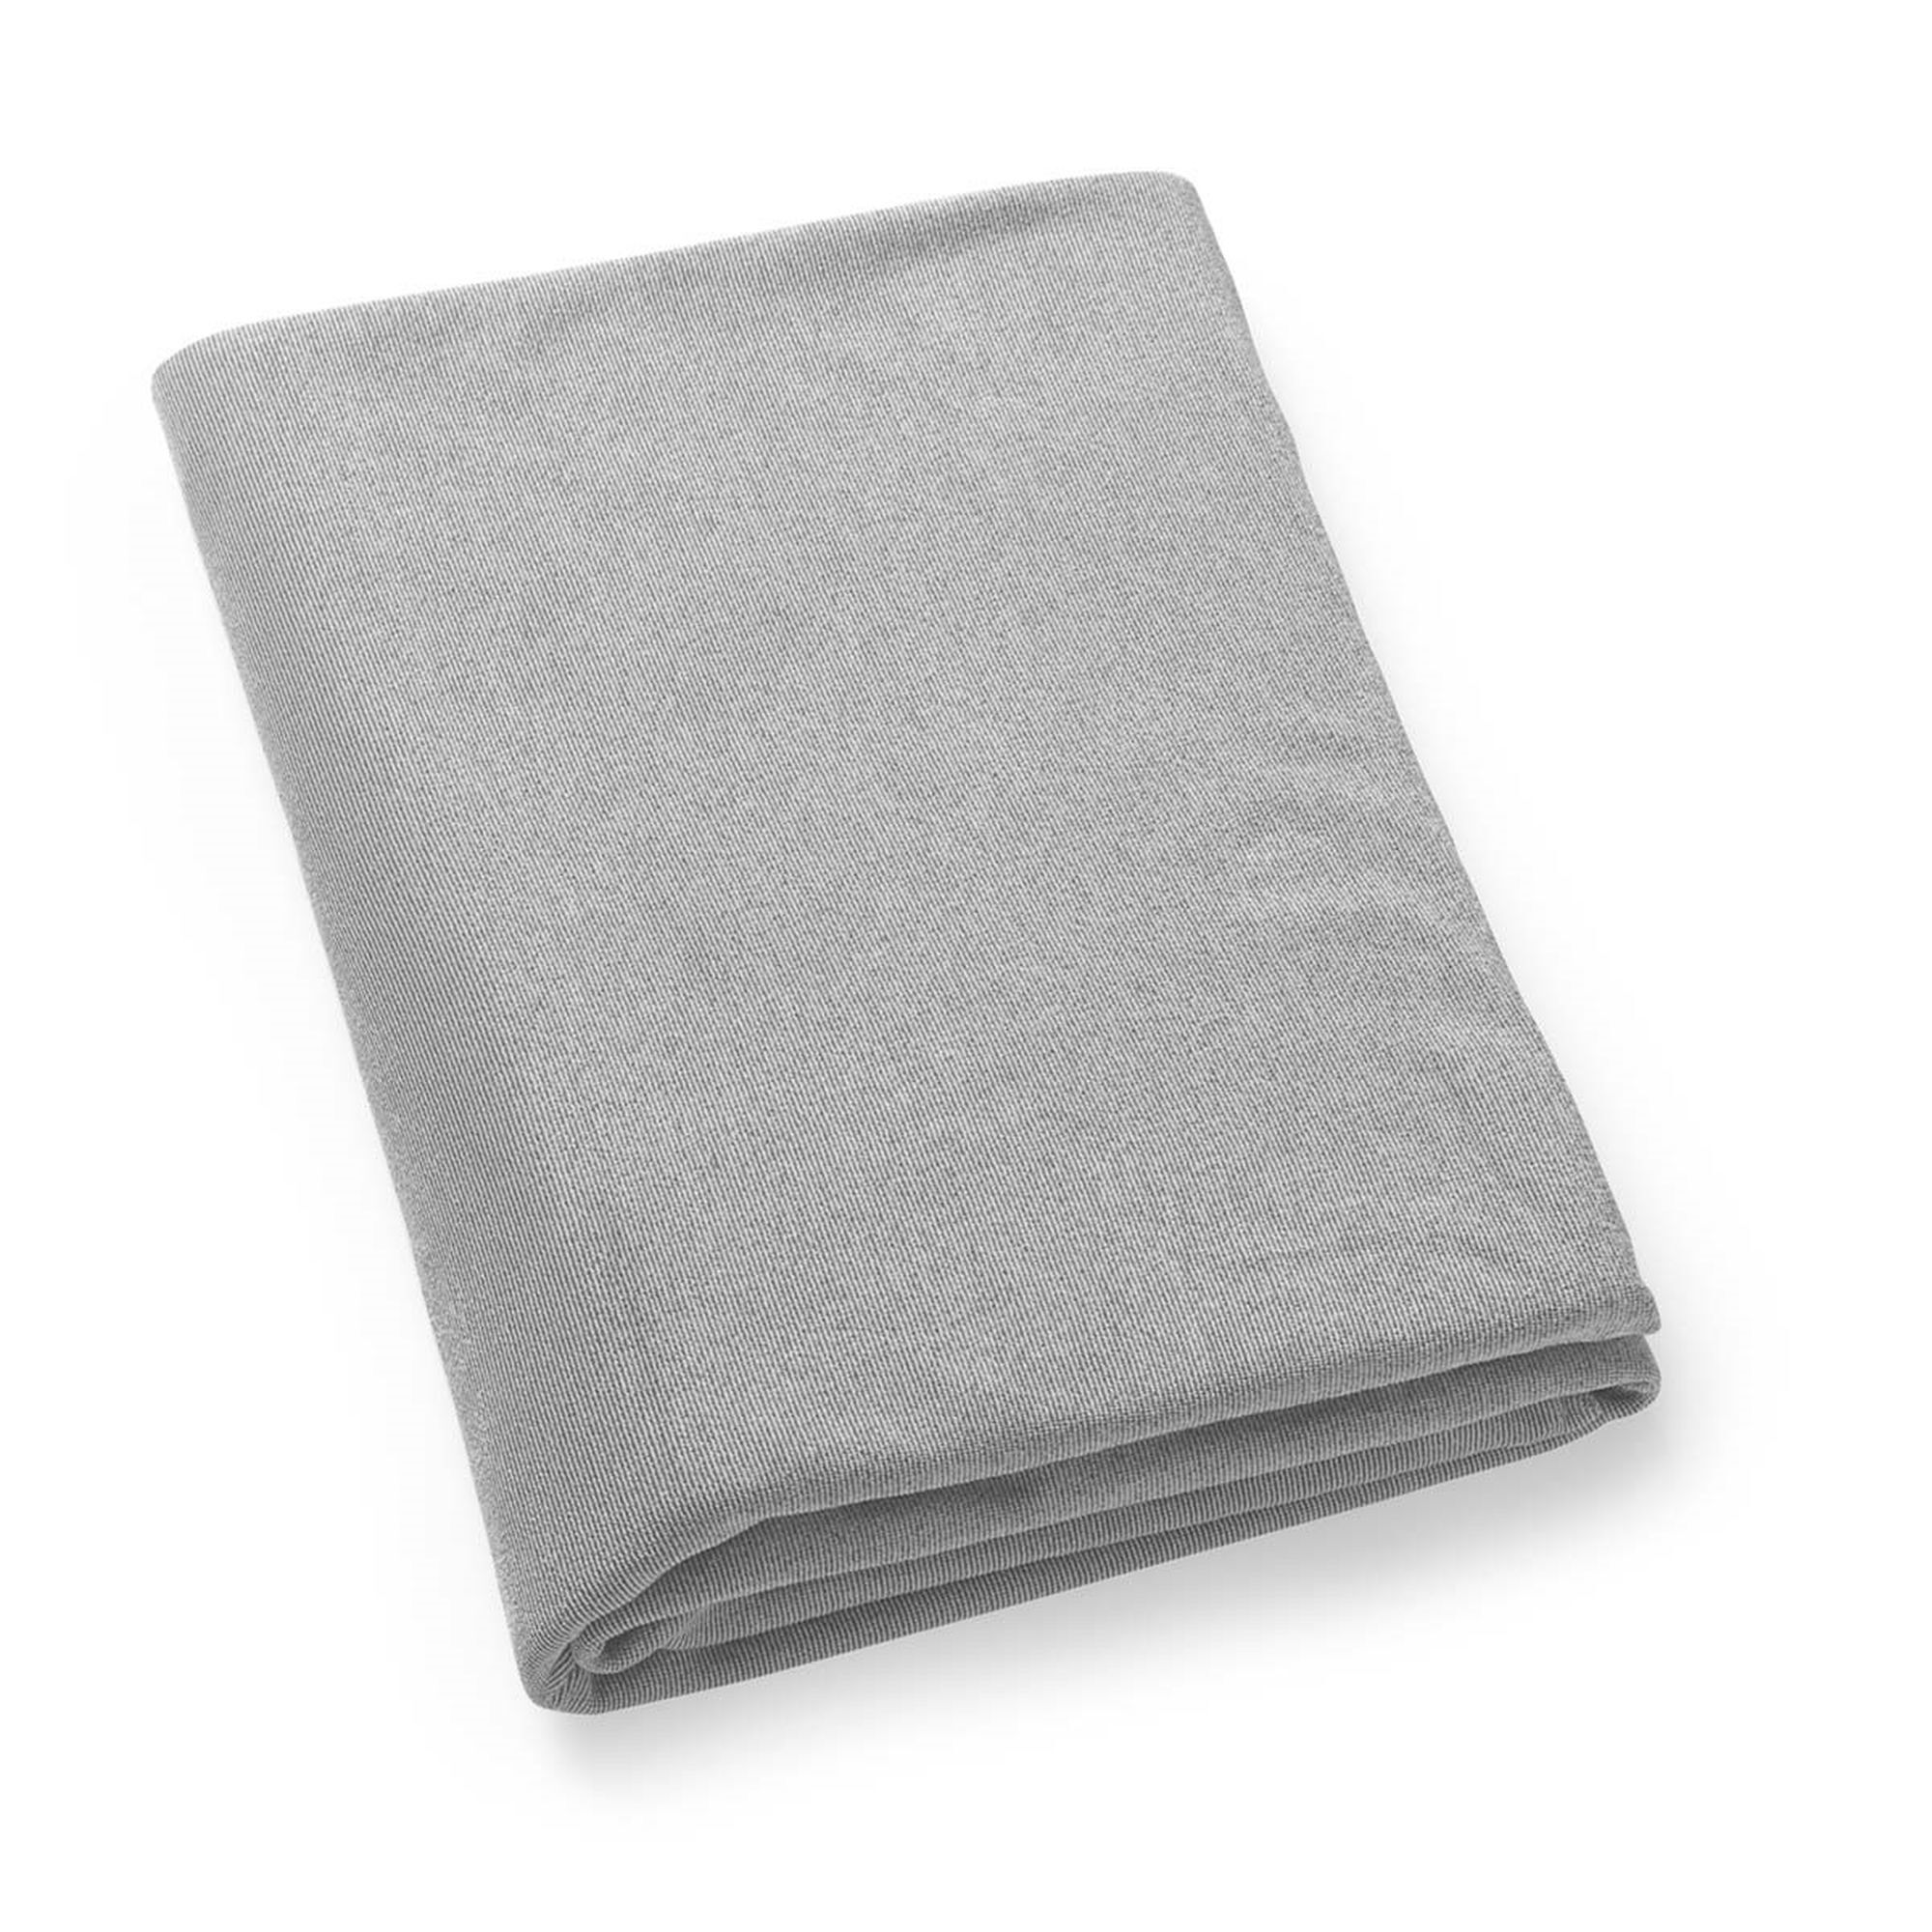 100% Cotton Musiln Fitted Bassinet Sheet Chicco Lullago Gray Halo Fits Oval Lotus U.S. Bjorn Designthology Soft & Breathable for Boys and Girls 